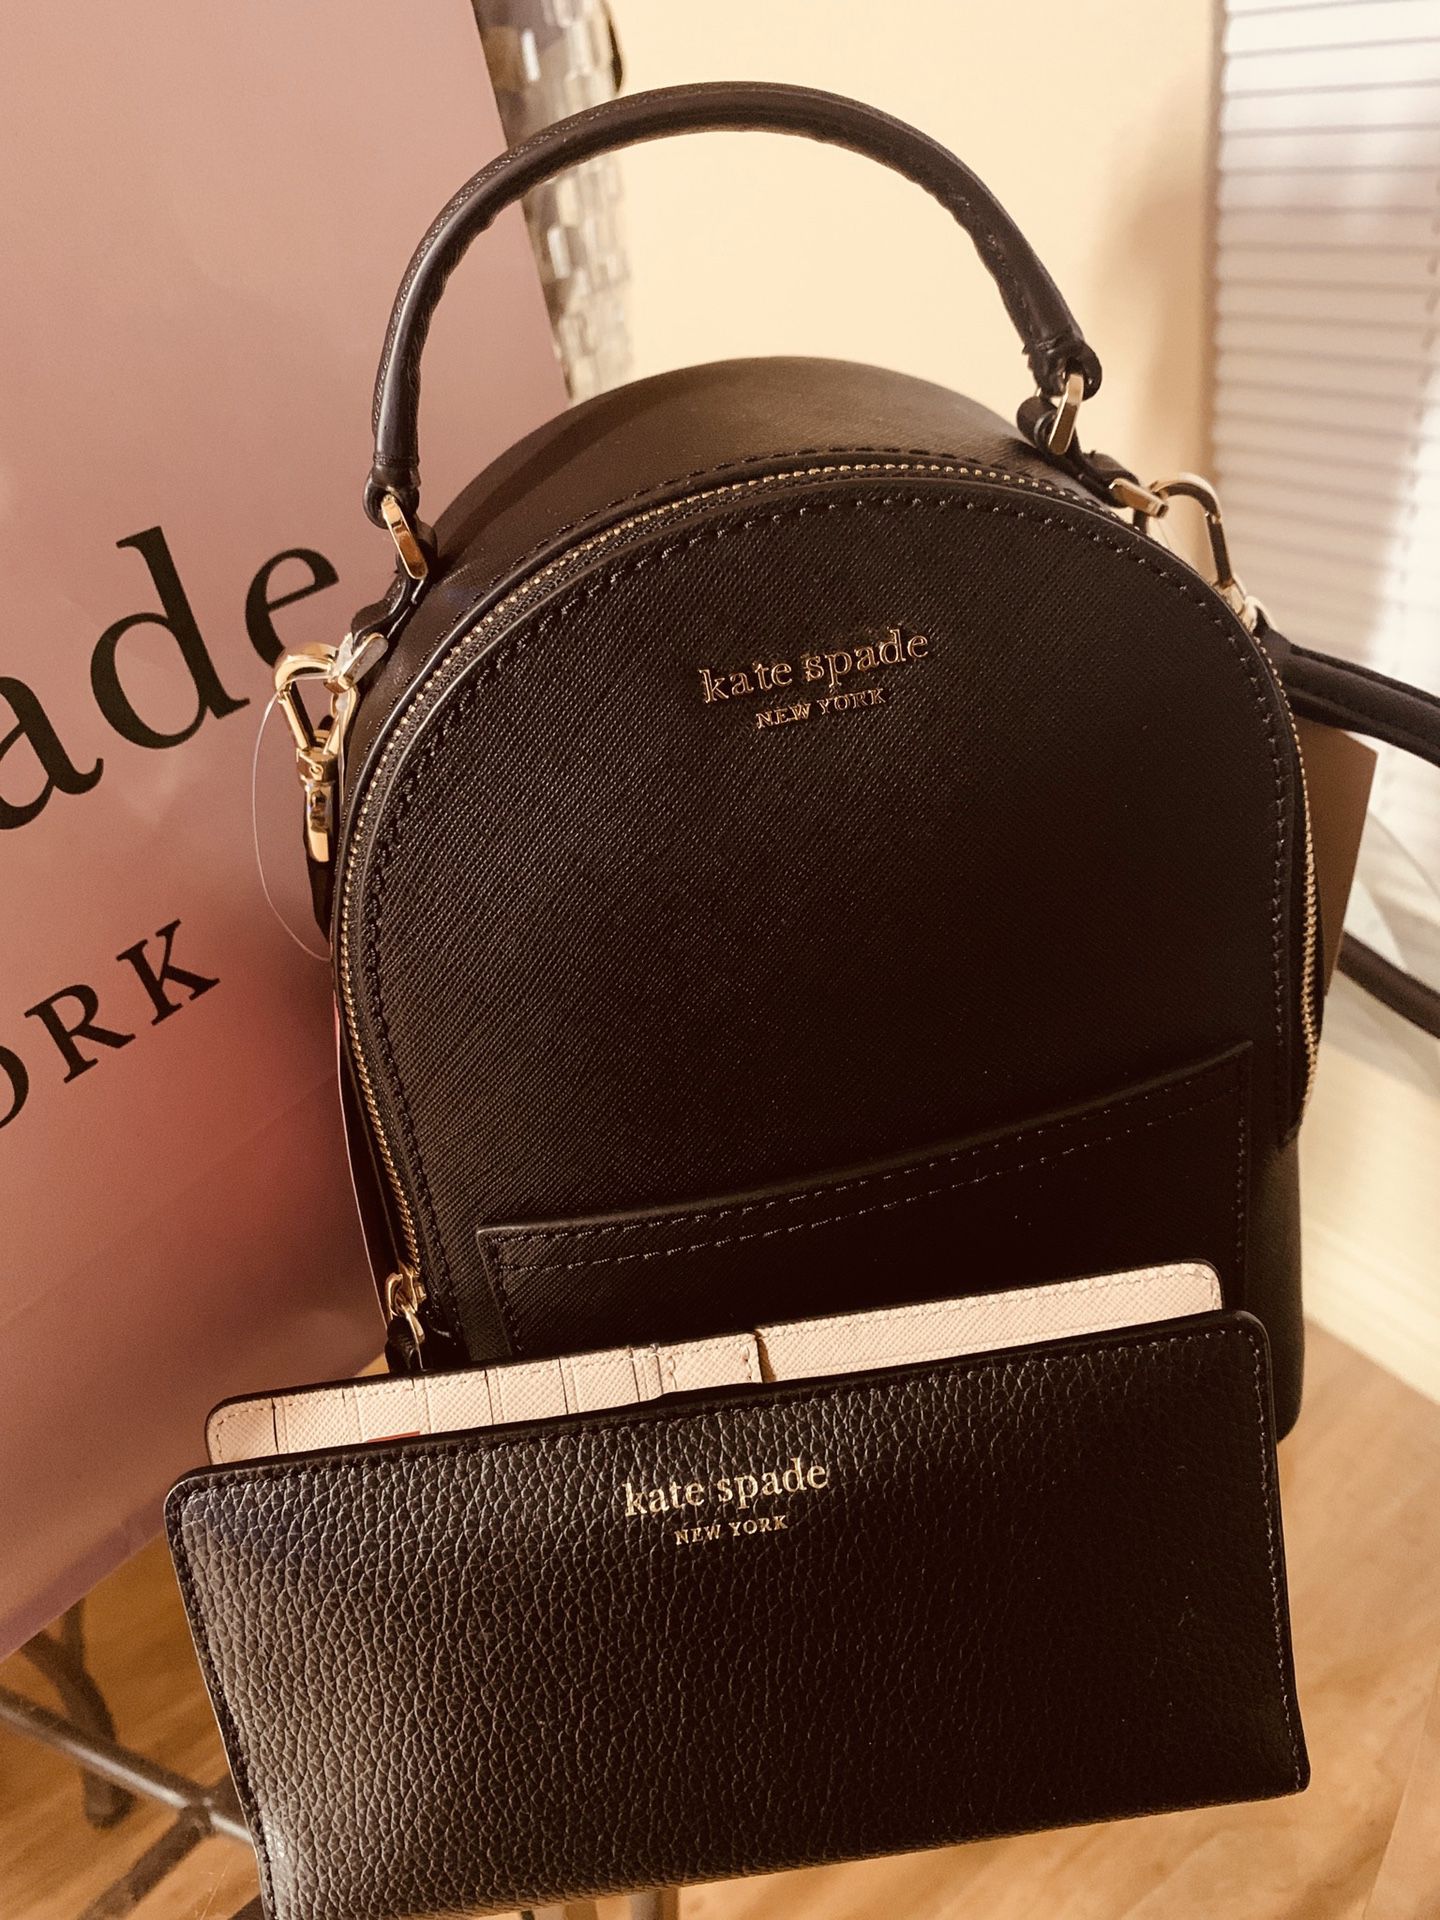 Kate Spade Mini Backpack and Wallet